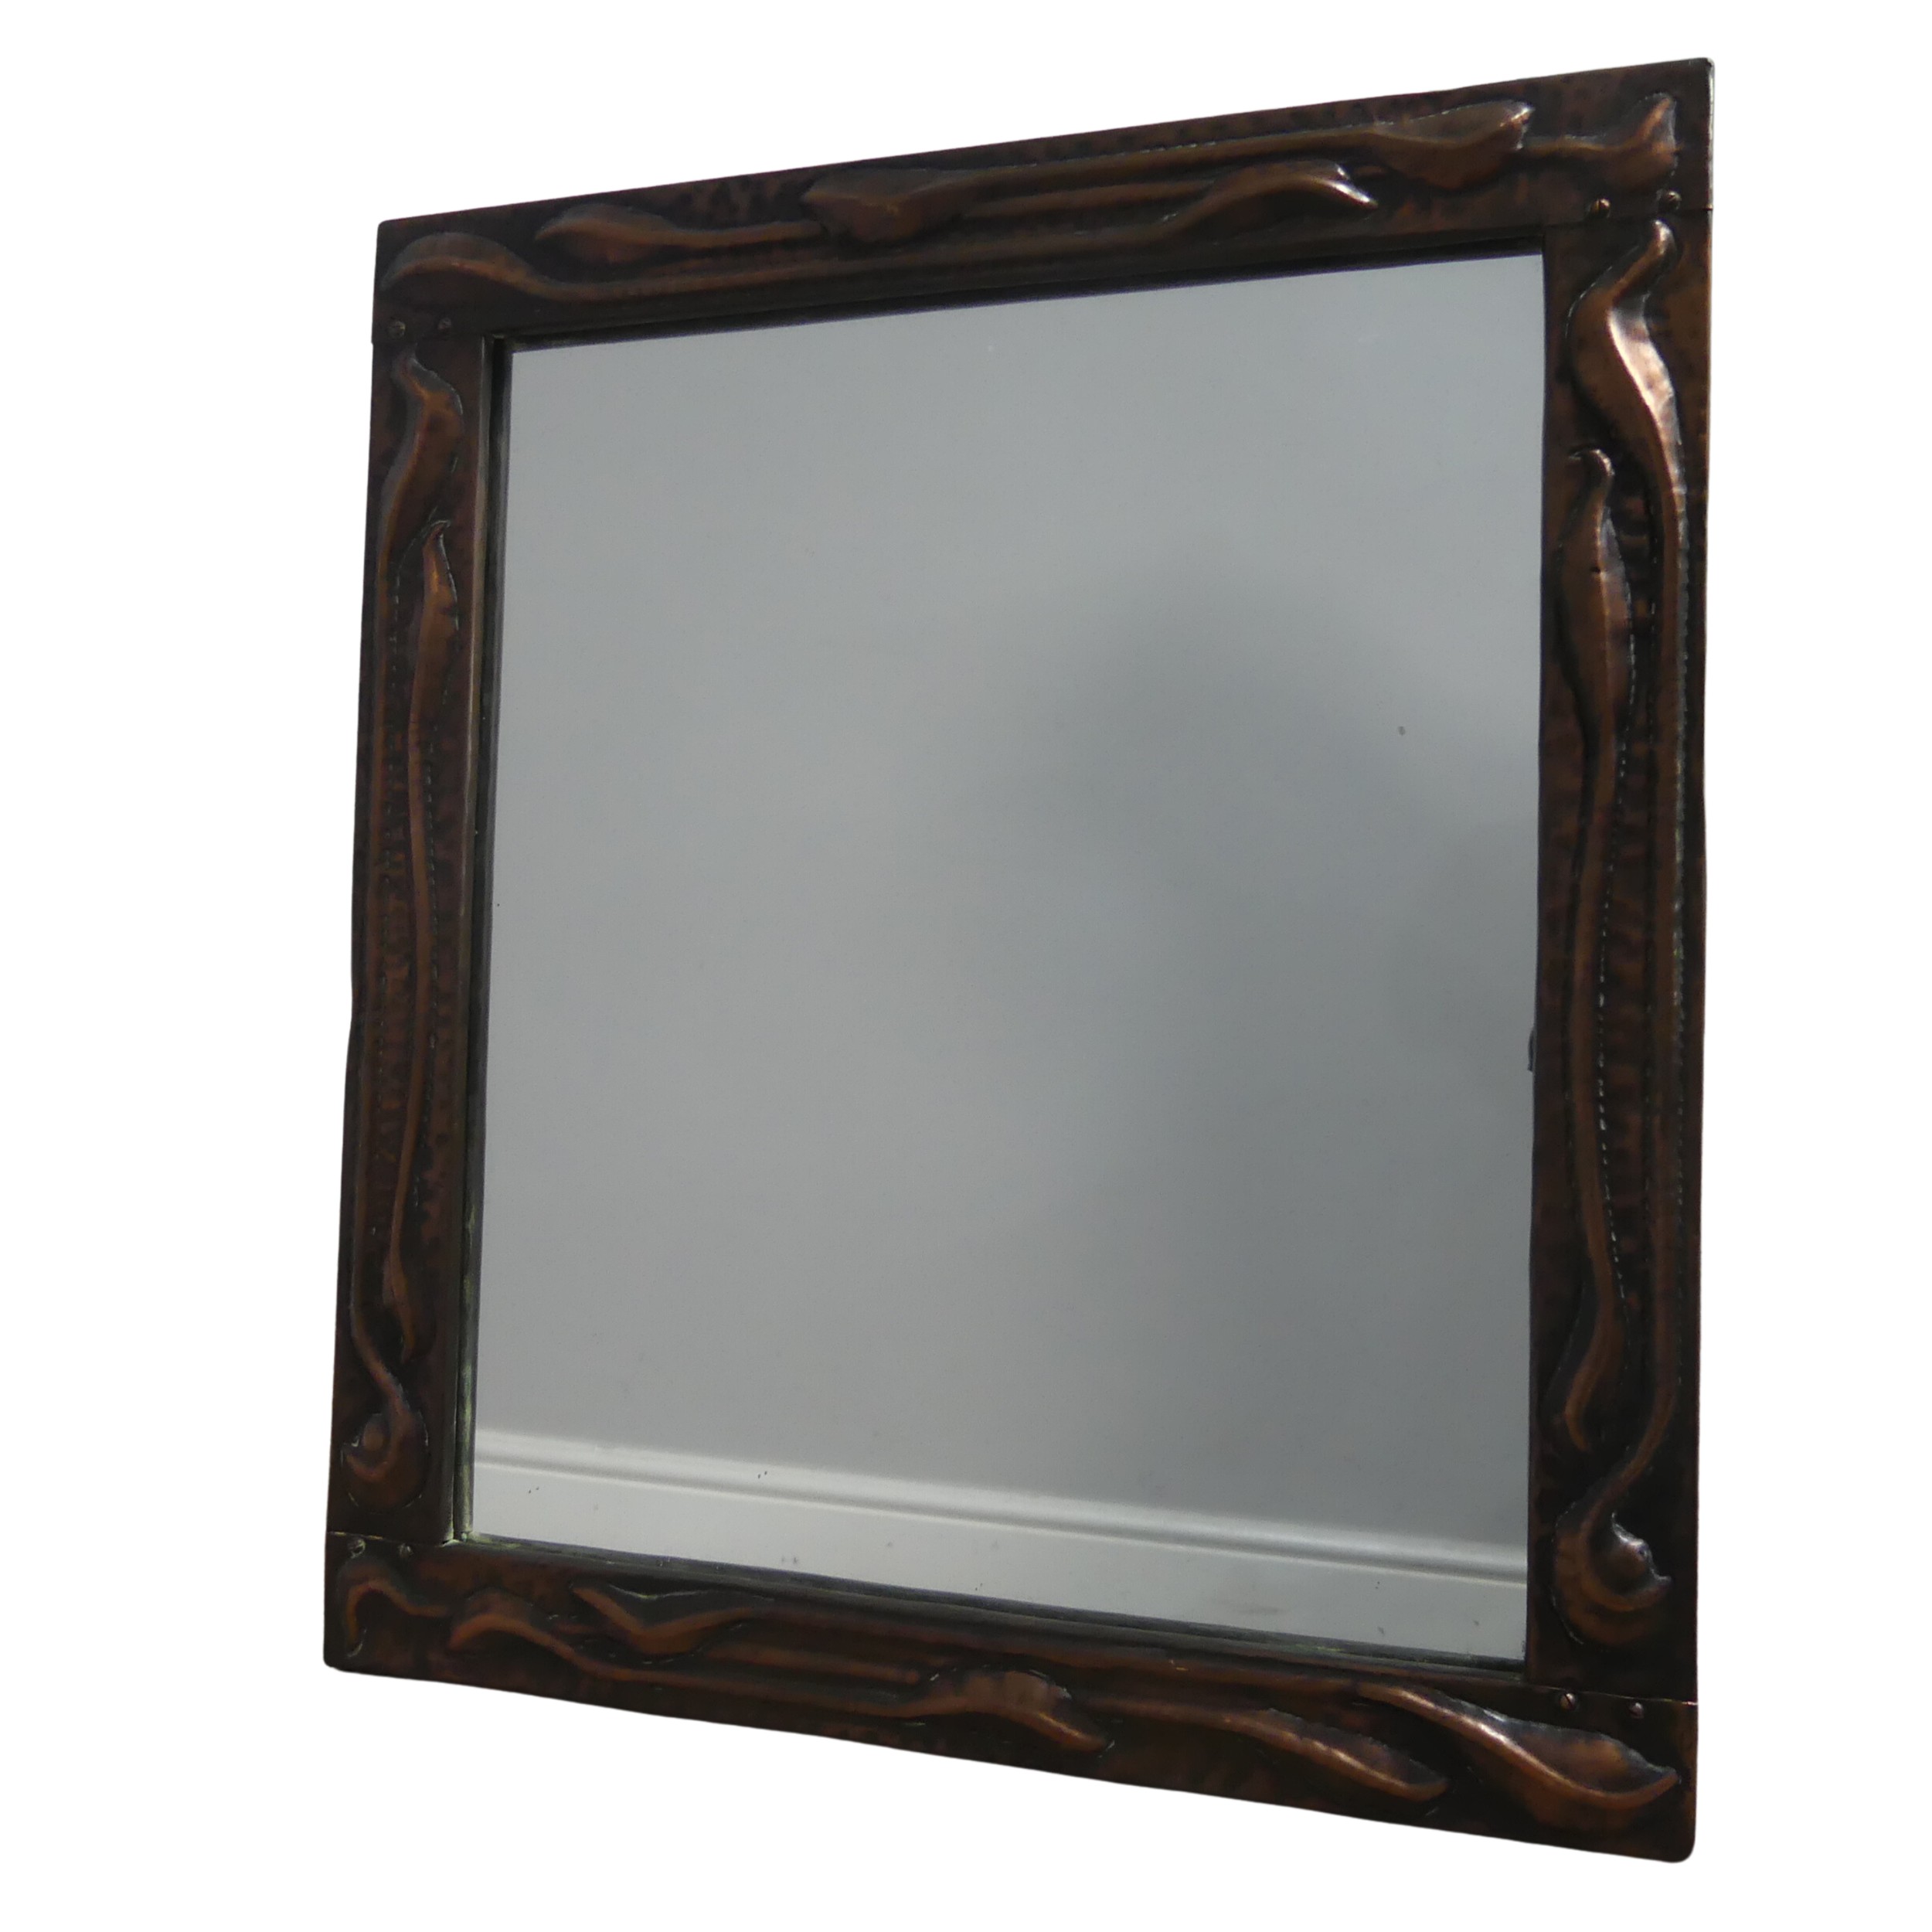 An Arts and crafts copper wall Mirror : Attributed to John Pearson circa 1900, the rectangular